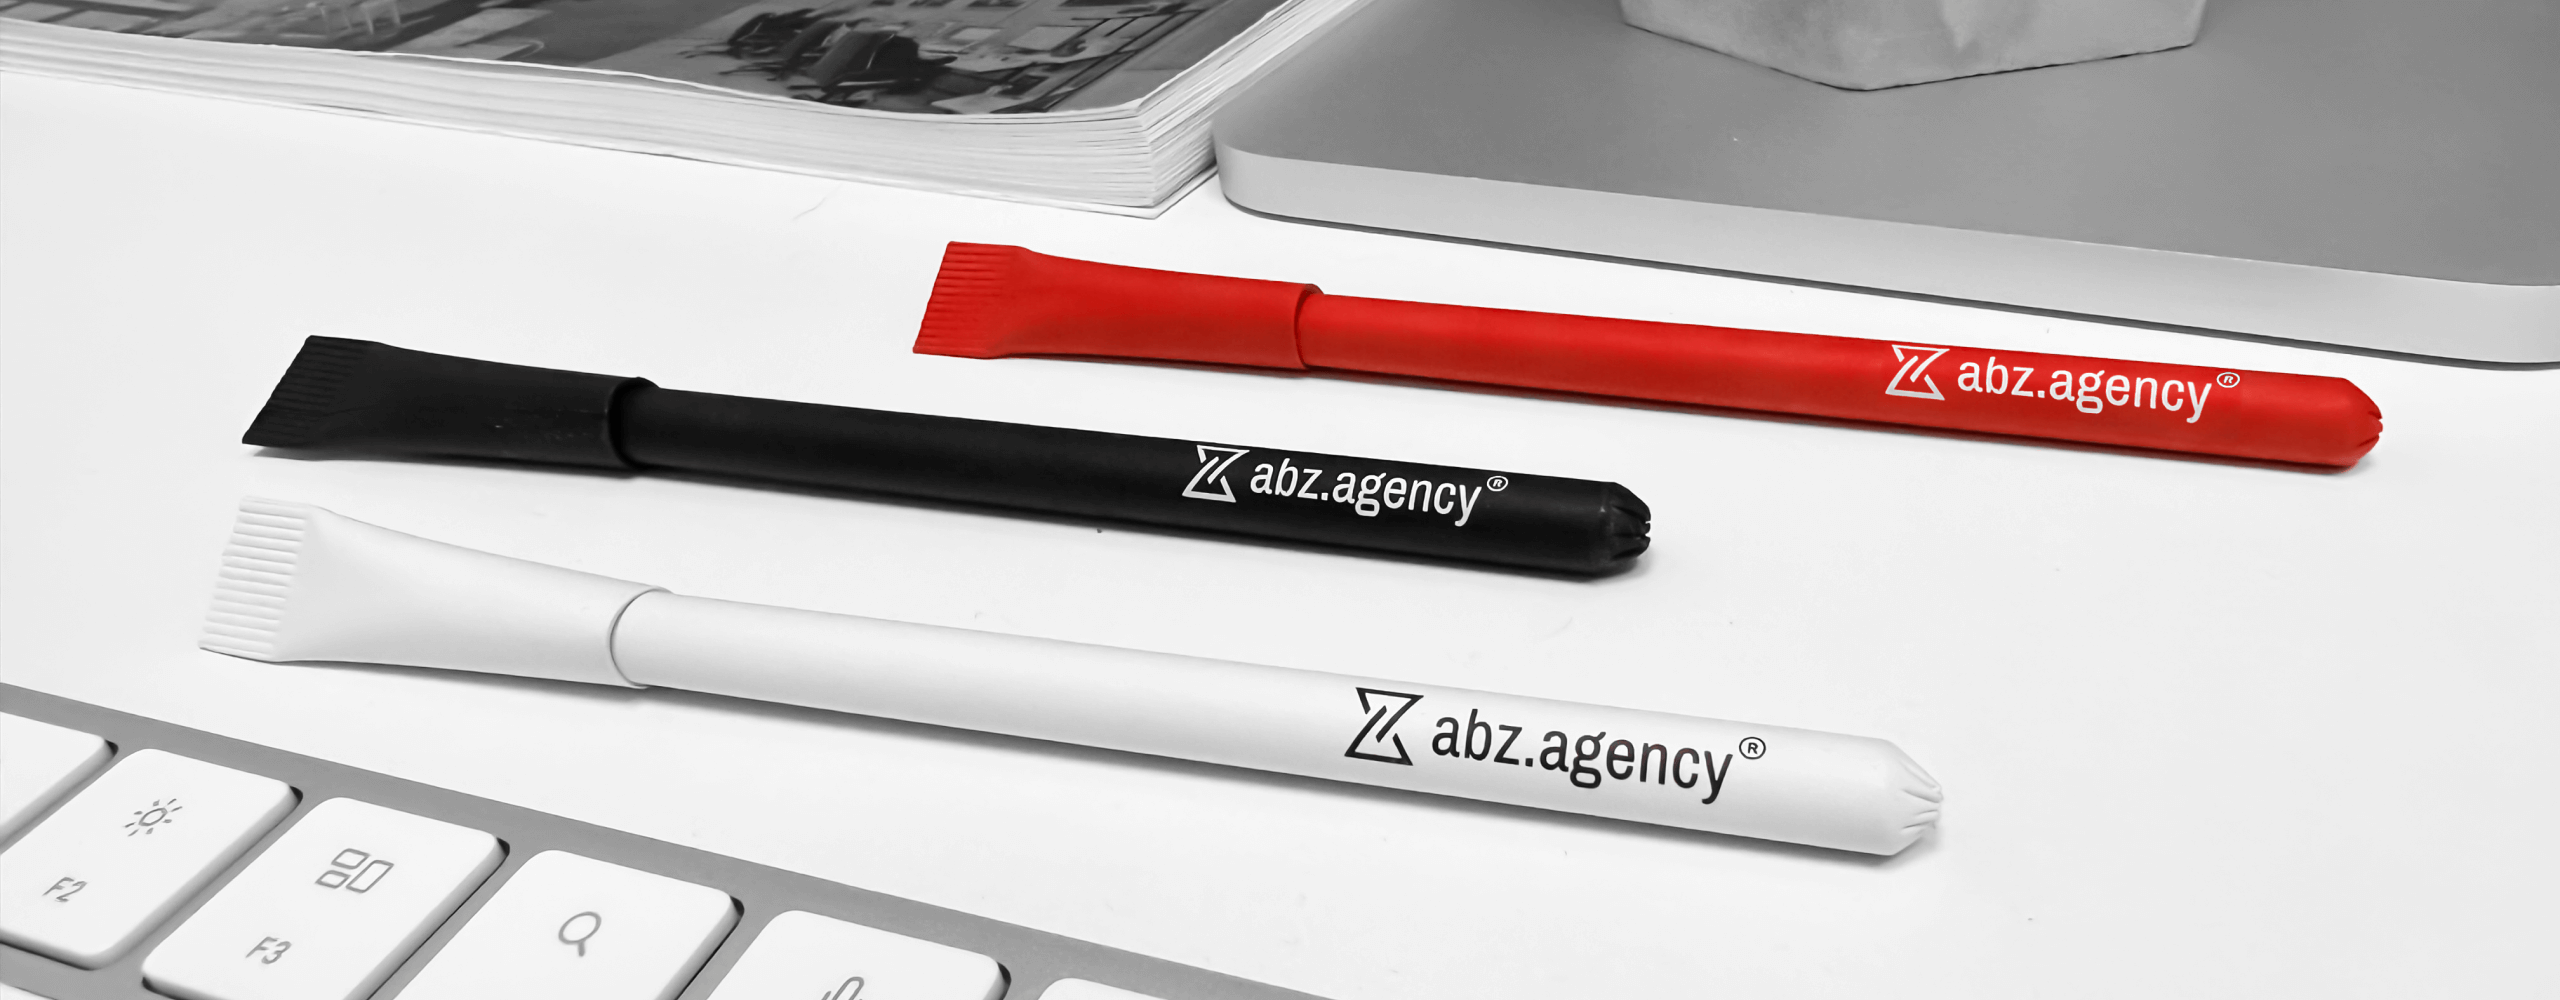 Eco-pen of abz.agency® on table